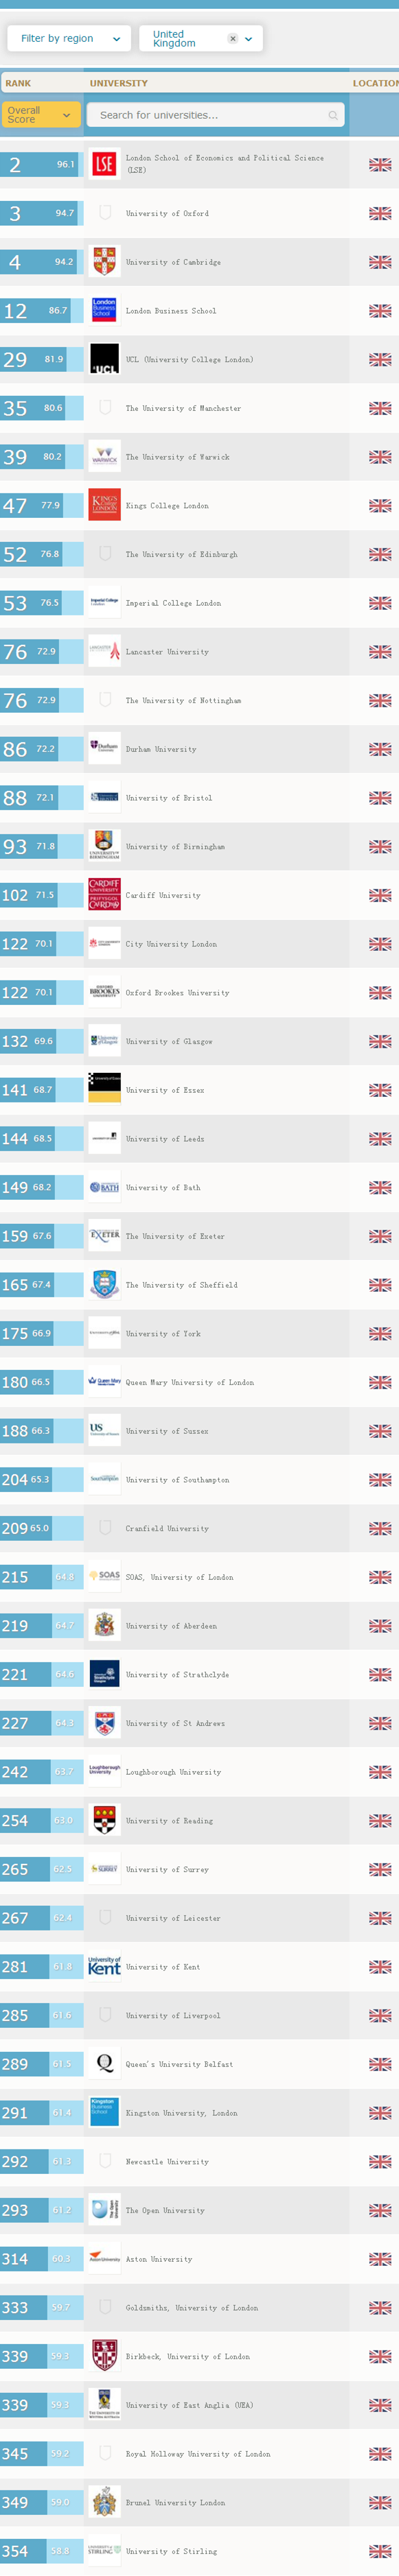 QS World University Rankings by Faculty 2015_副本